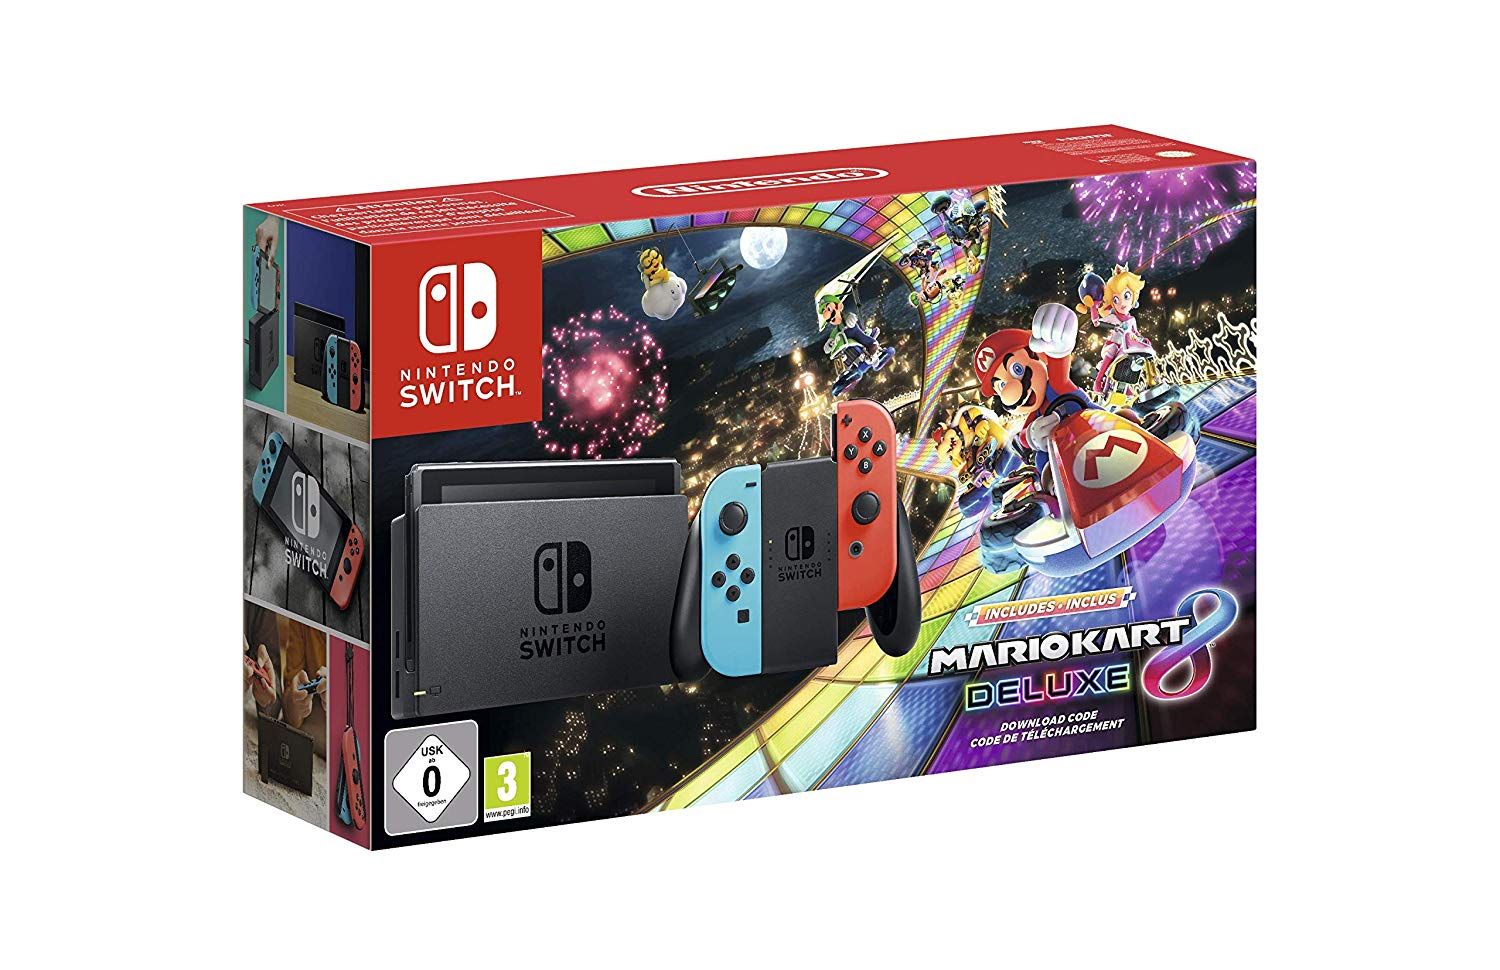 Console Switch - Edition Mario kart 8 deluxe